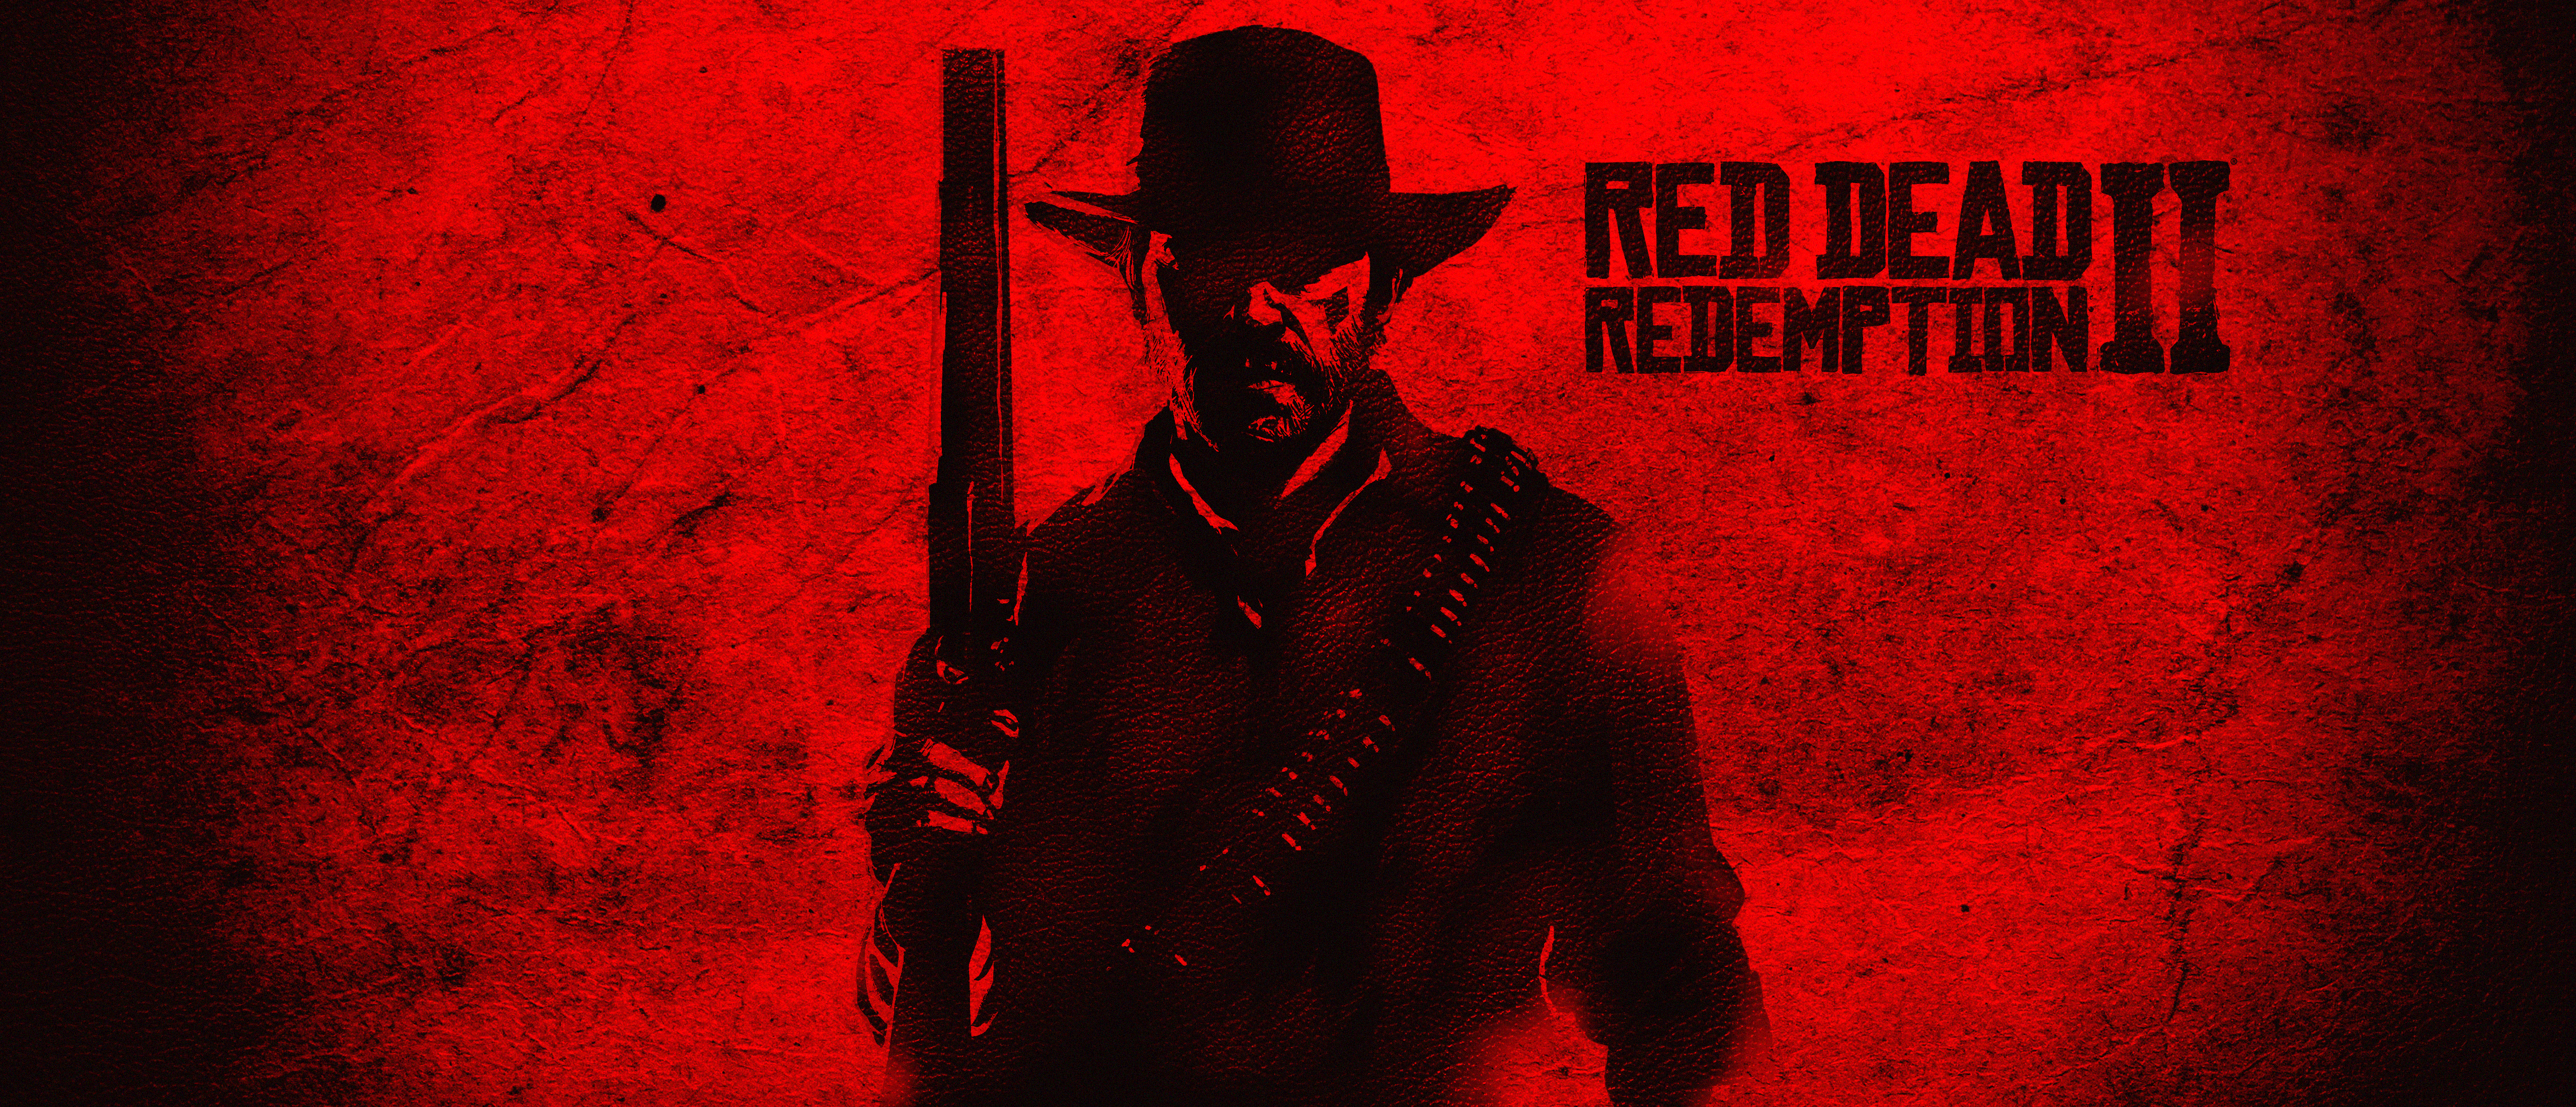 General 5120x2200 Red Dead Redemption Red Dead Redemption 2 Arthur Morgan Rockstar Games video games video game characters